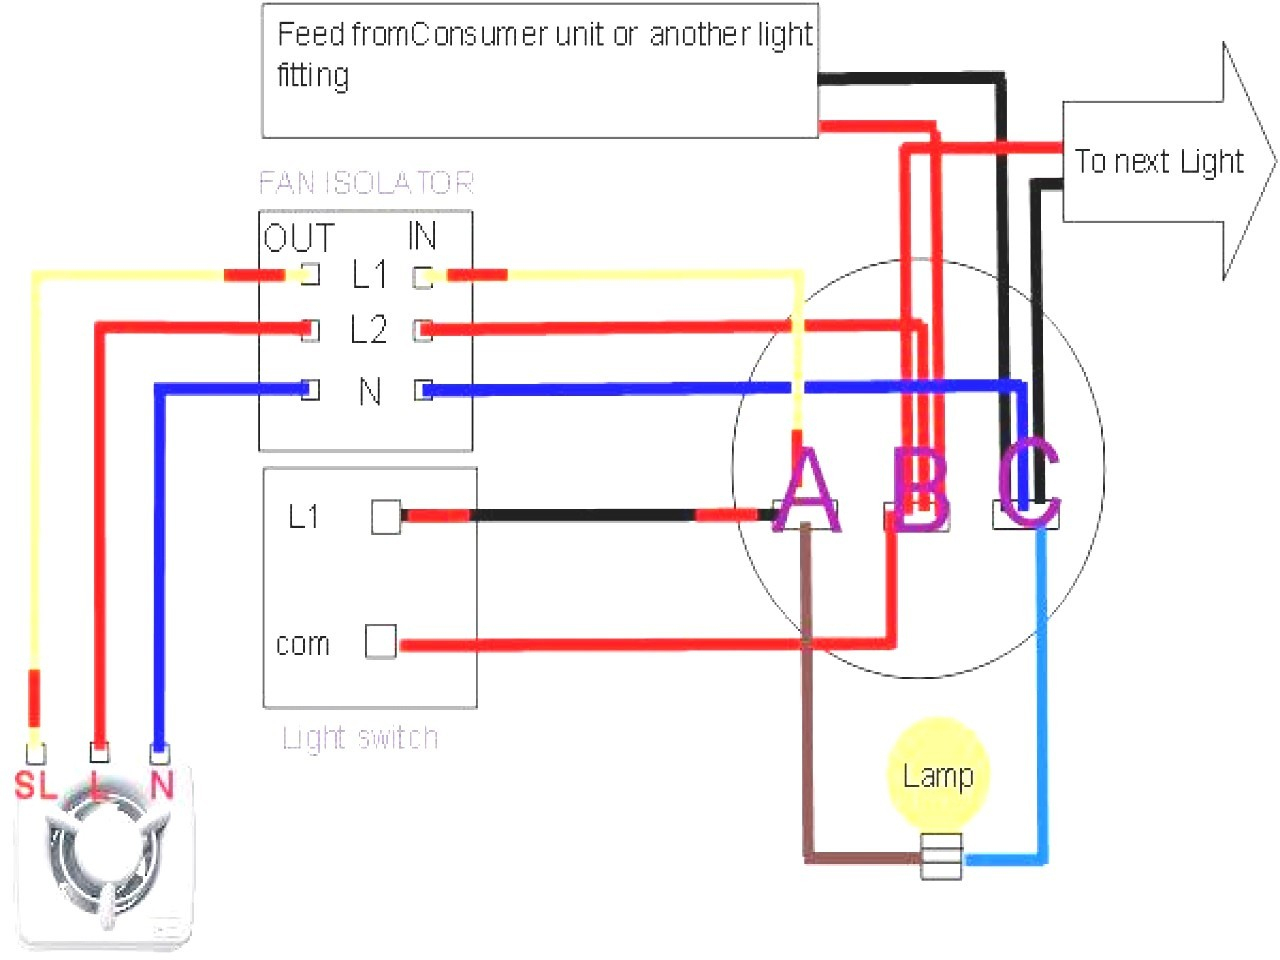 Leviton Double Switch Wiring Diagram | Wiring Library - Leviton Double Pole Switch Wiring Diagram